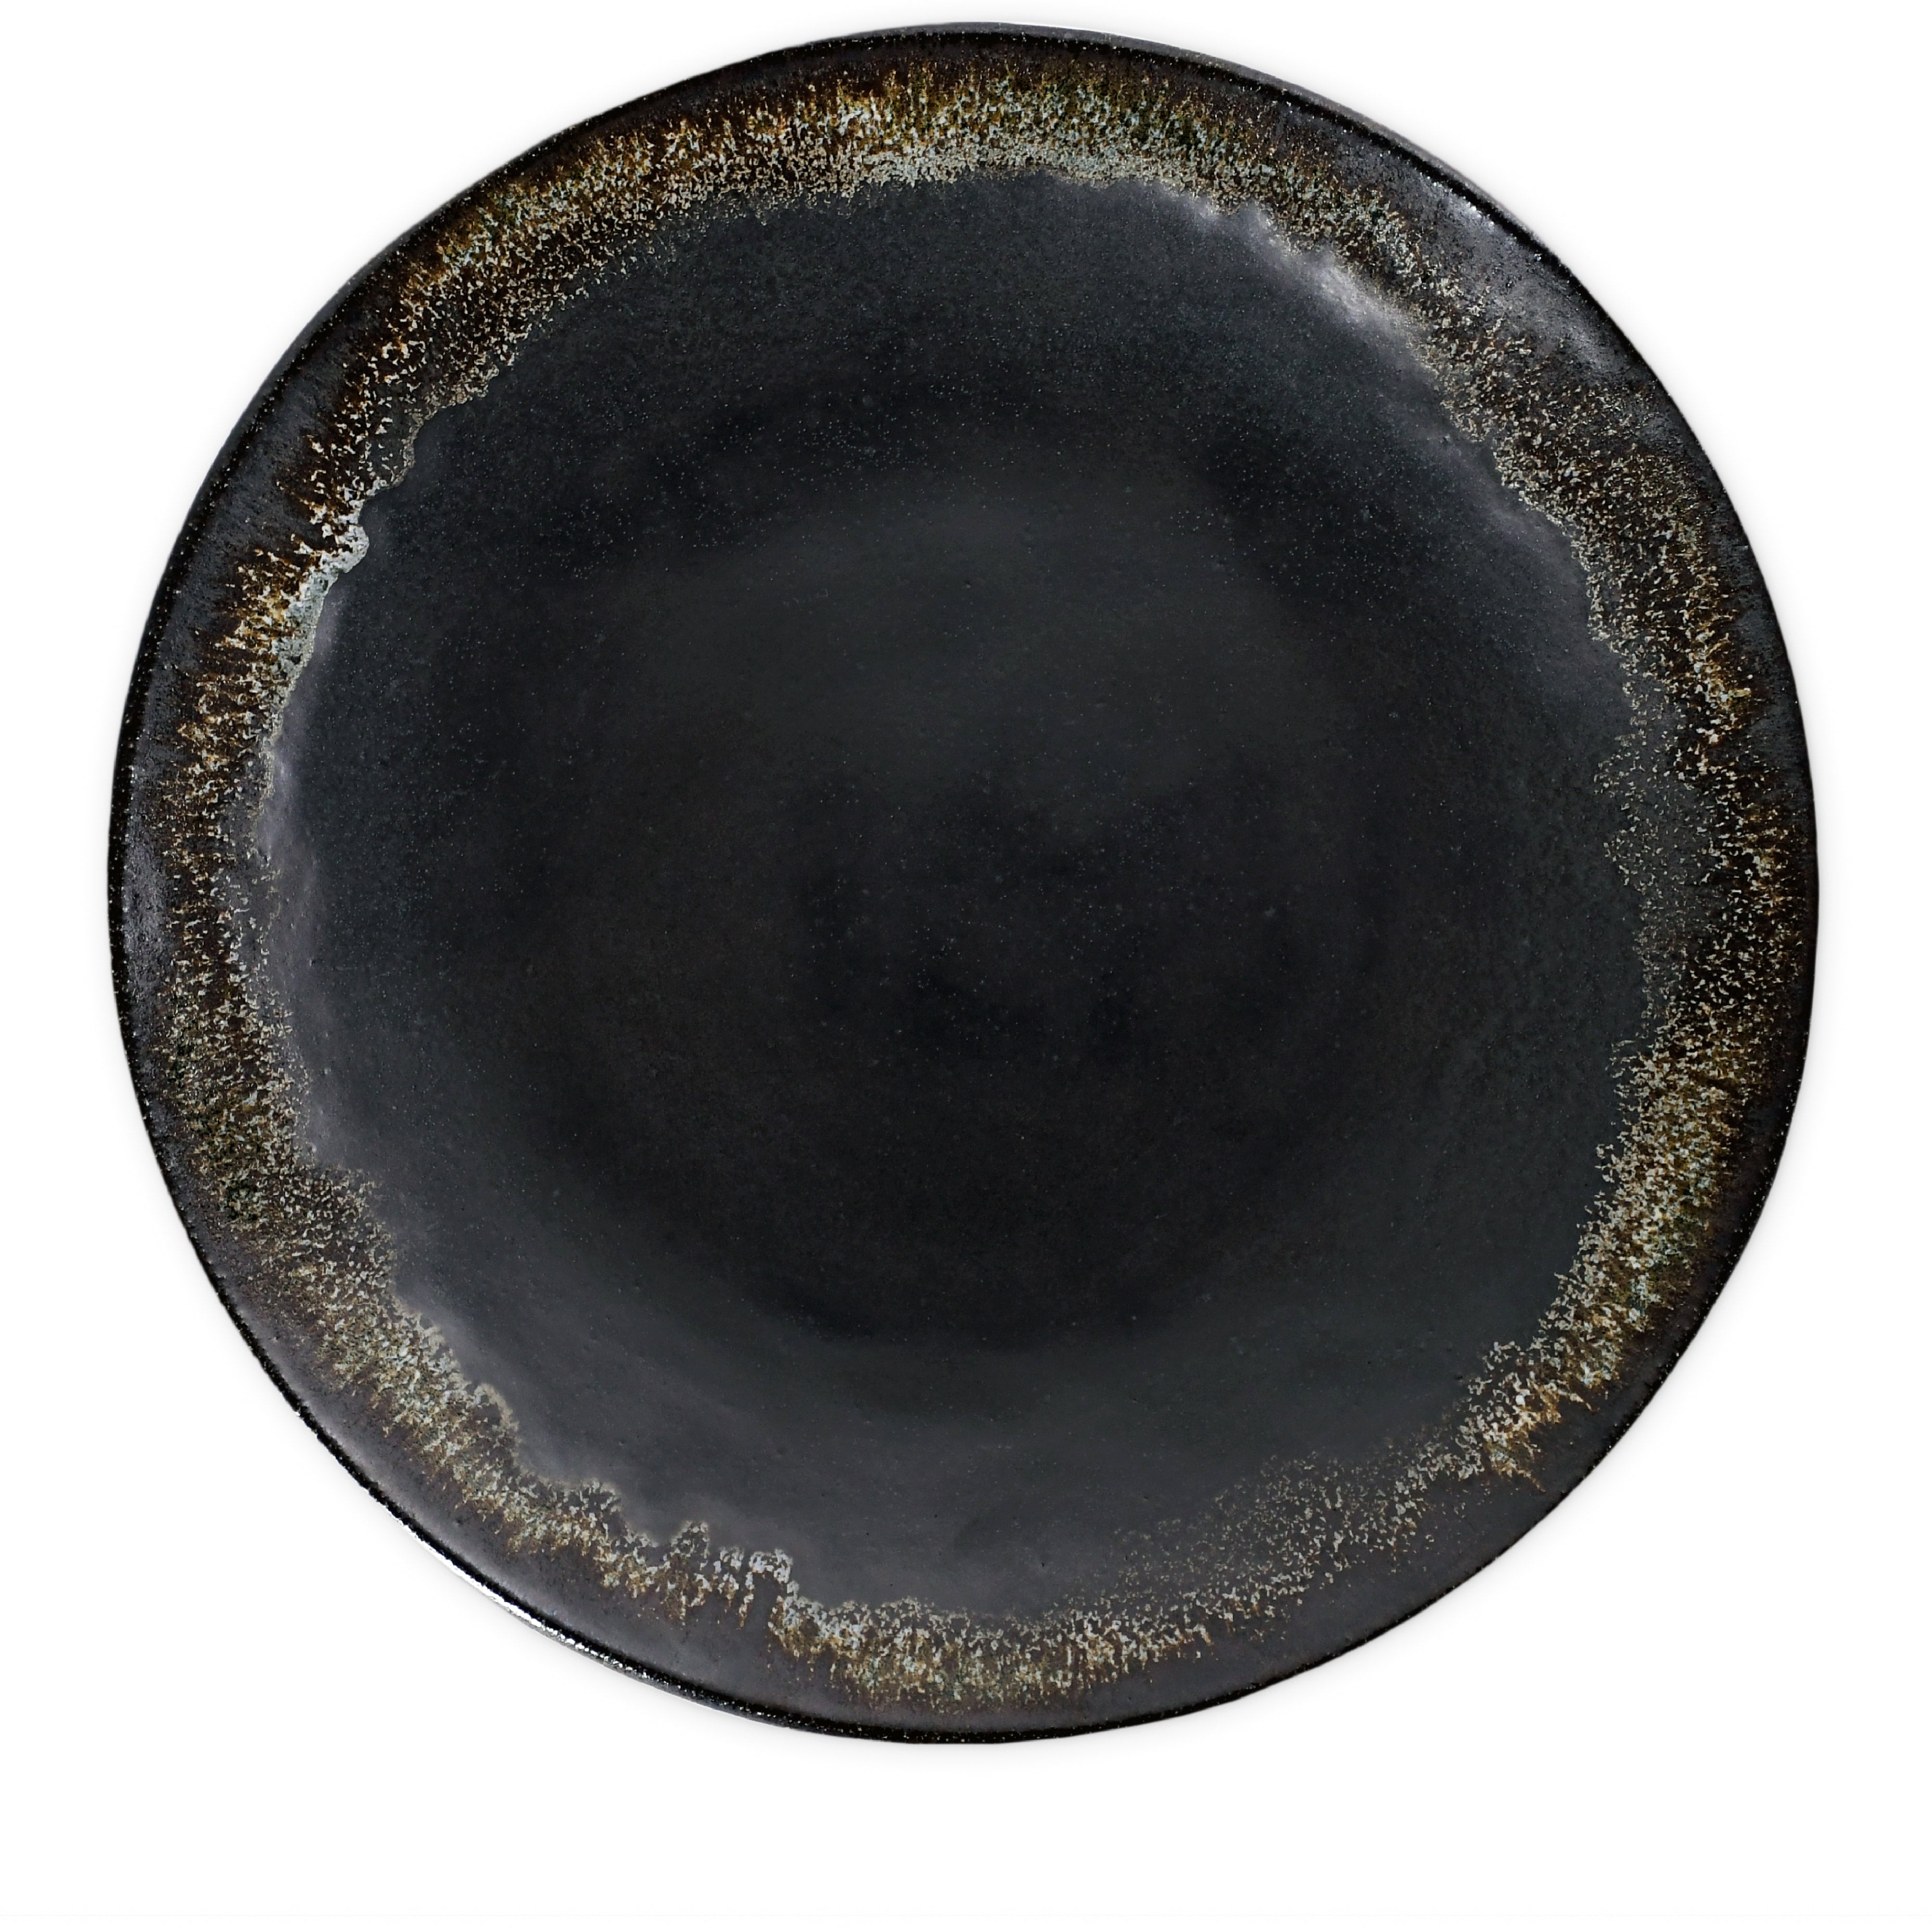 MM CLAY - SERVING PLATTER - ONYX